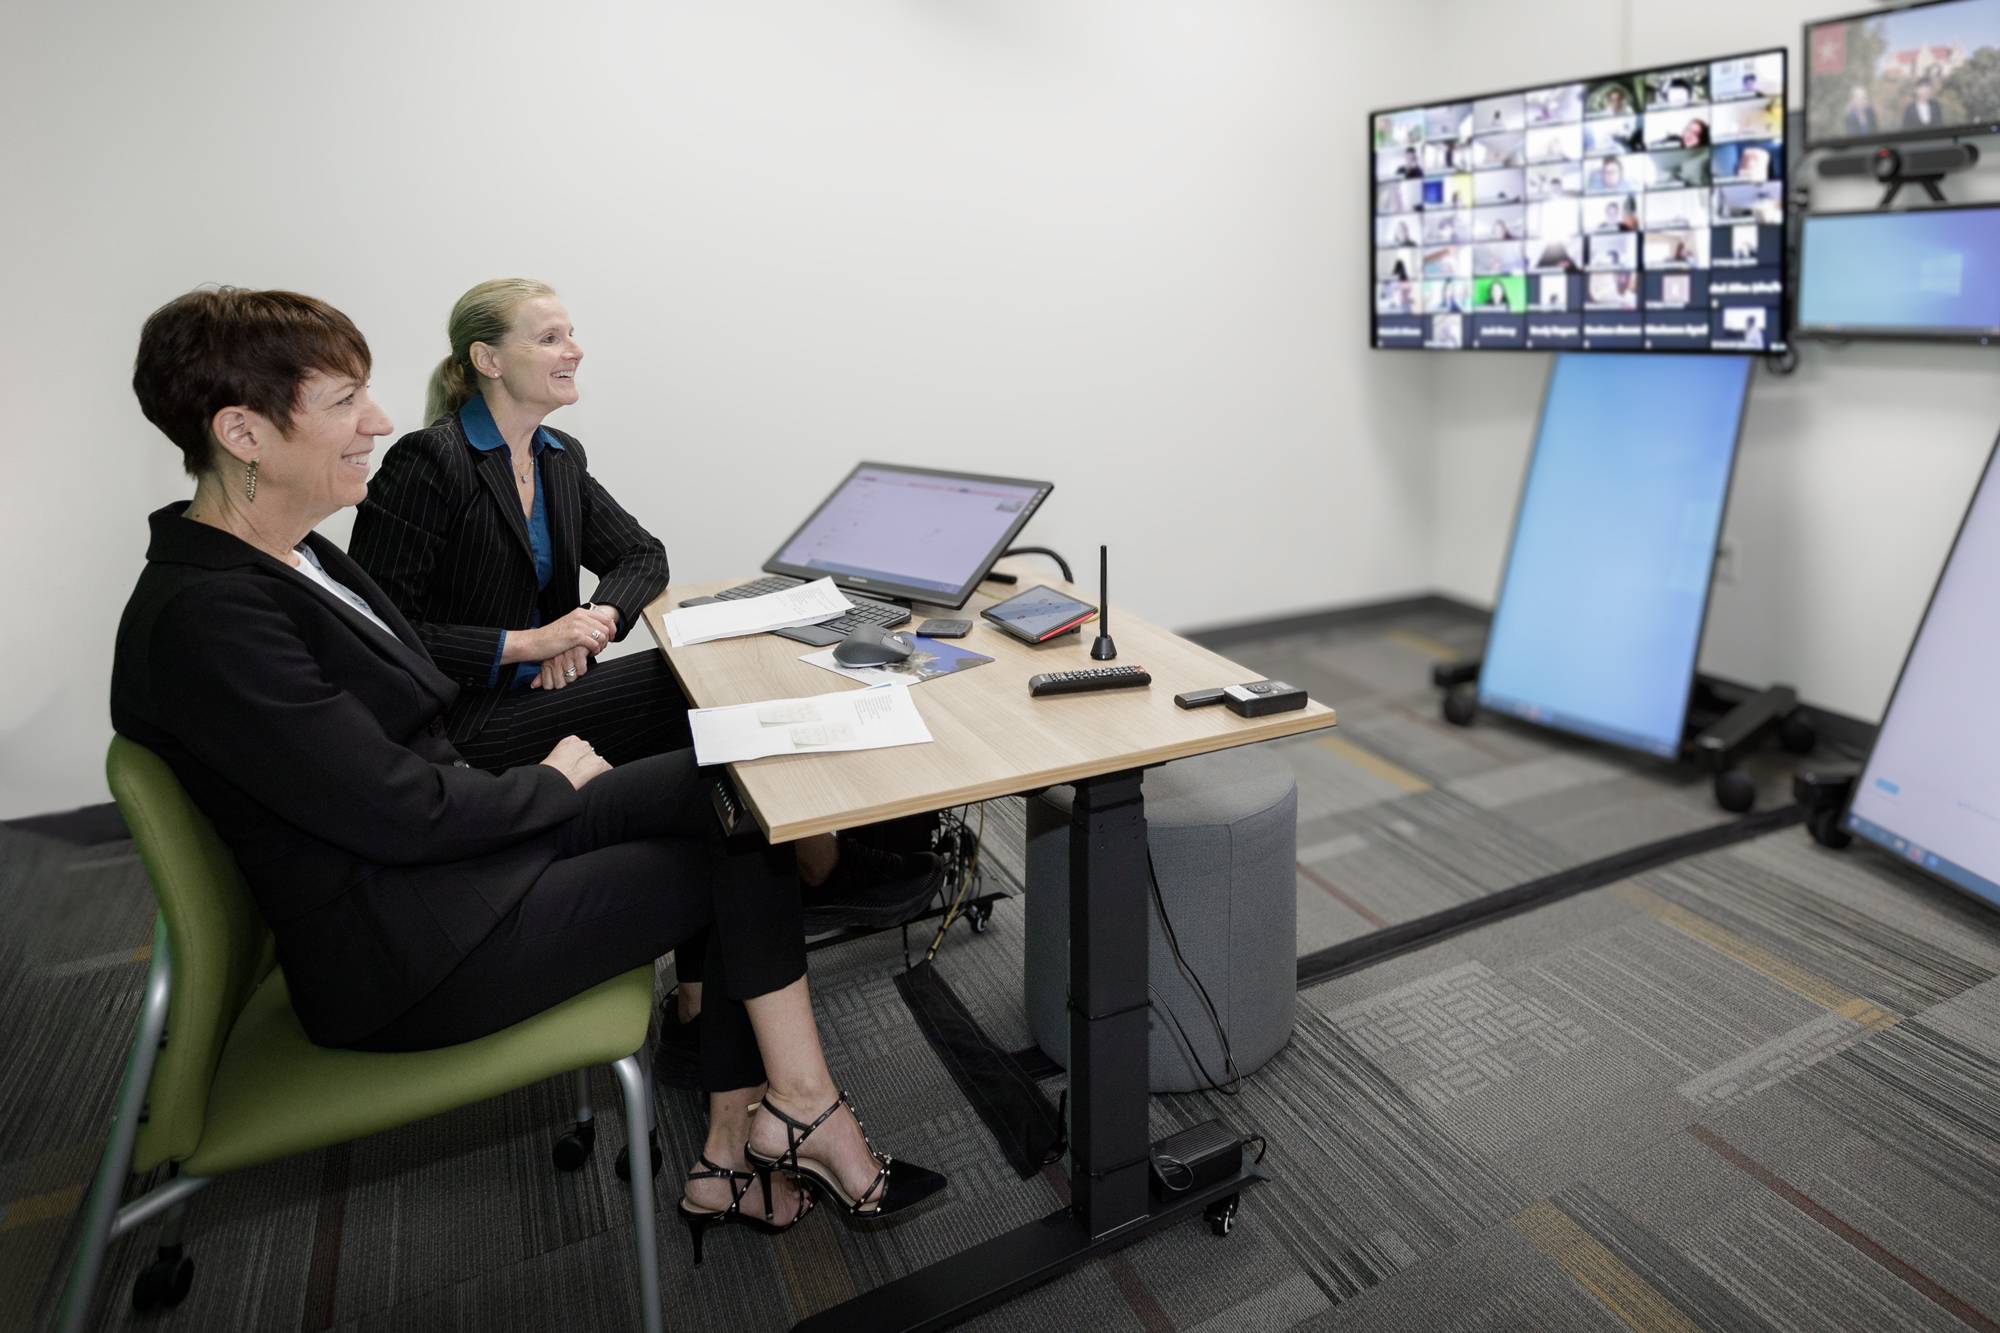 two women sitting in room looking at large group of people in virtual meeting on computer screen